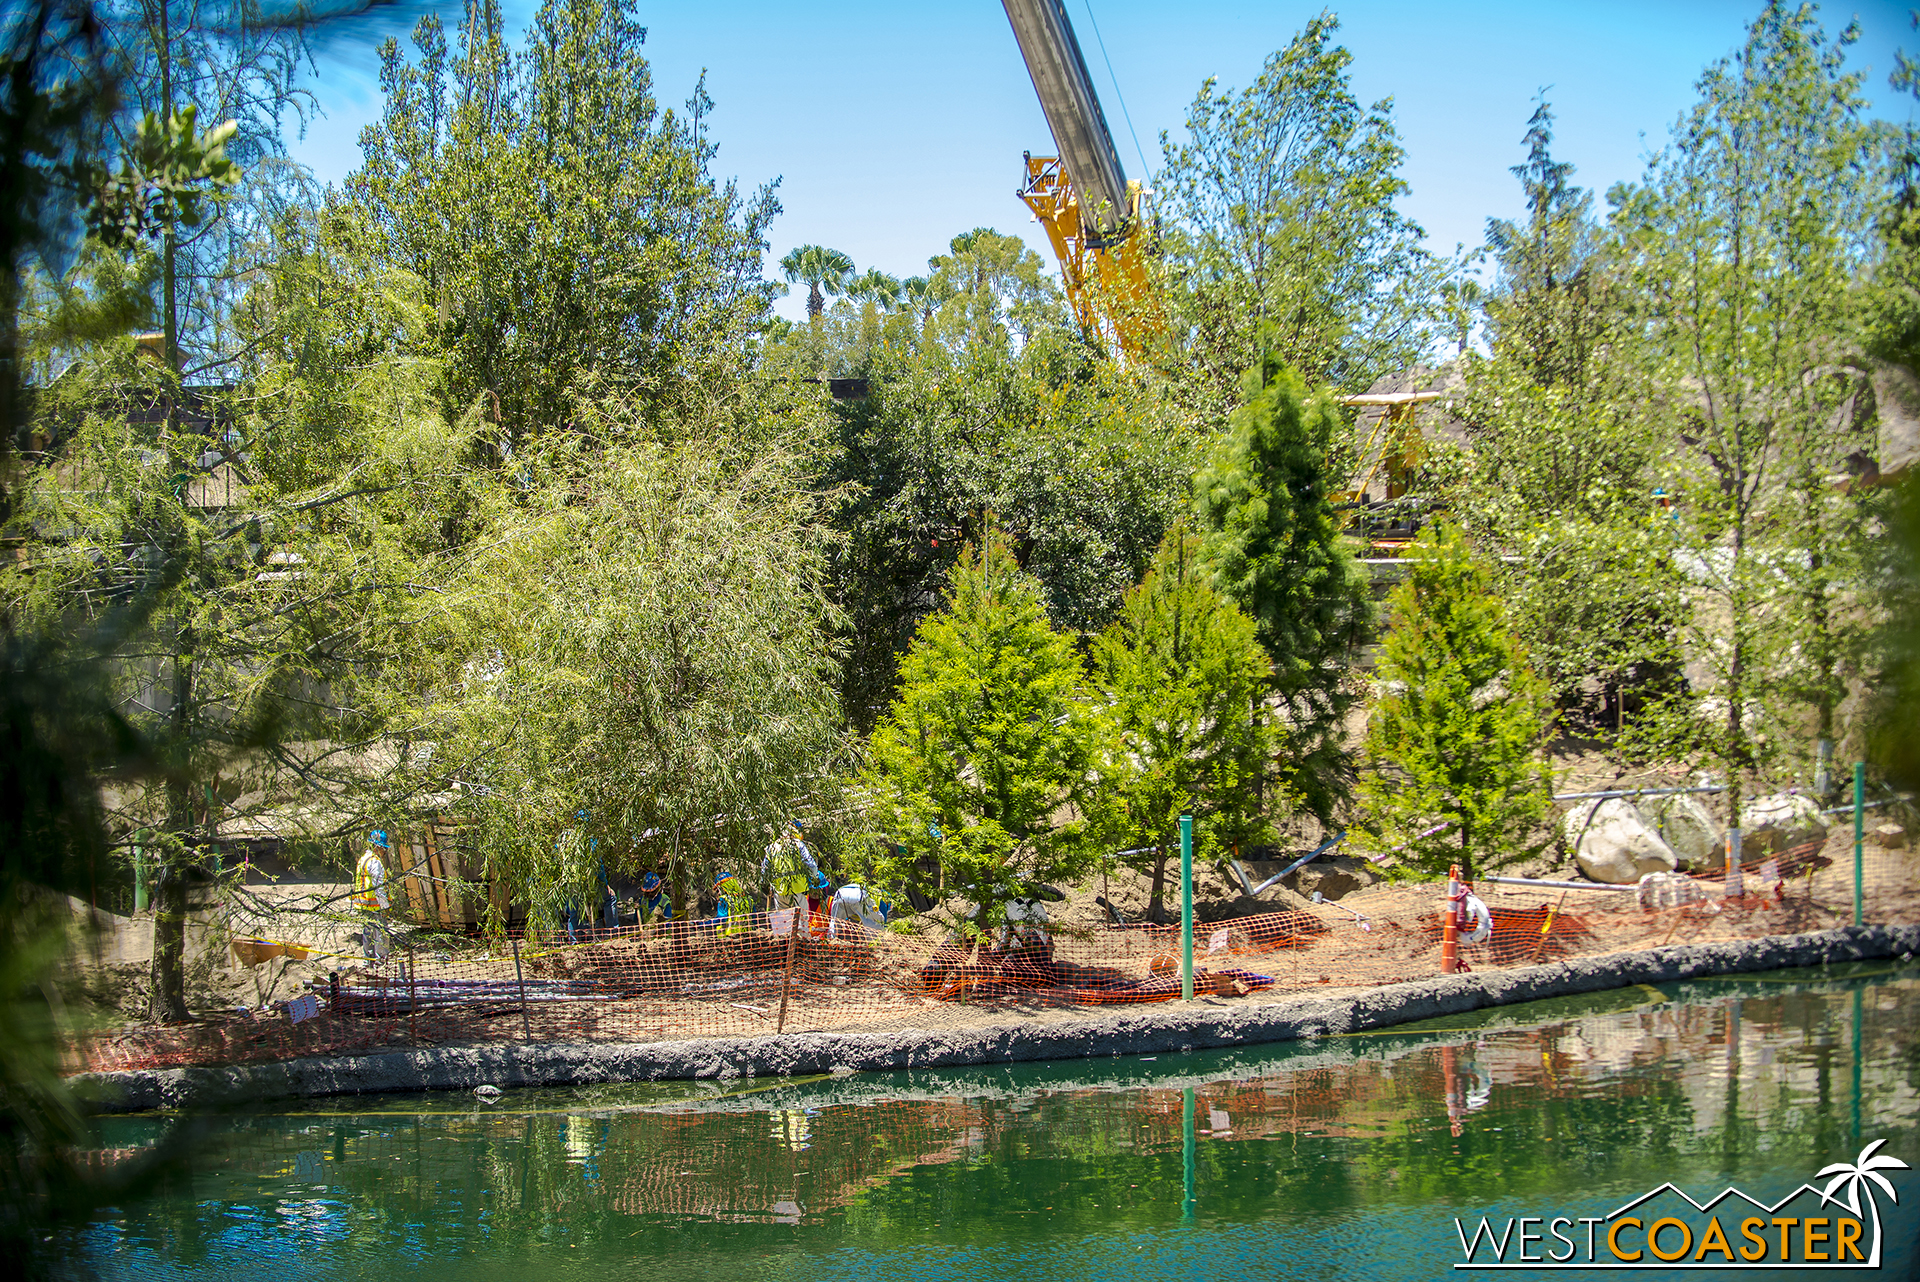  The reopening of Tom Sawyer Island has provided glimpses of the eventual riverside path from Critter Country to "Star Wars" Land, but from the river's side. 